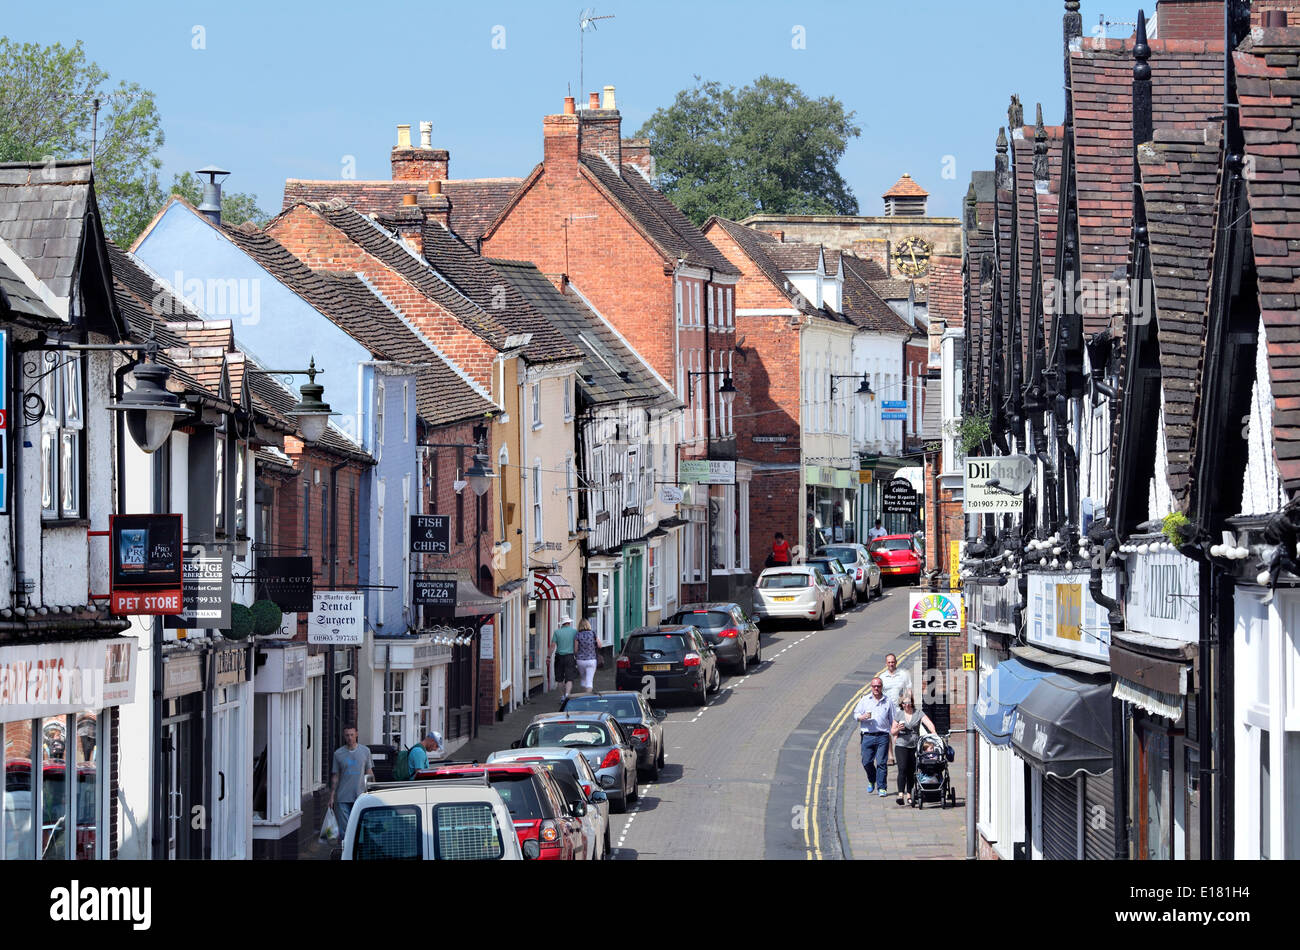 High Street, Droitwich Spa, Worcestershire. Foto Stock